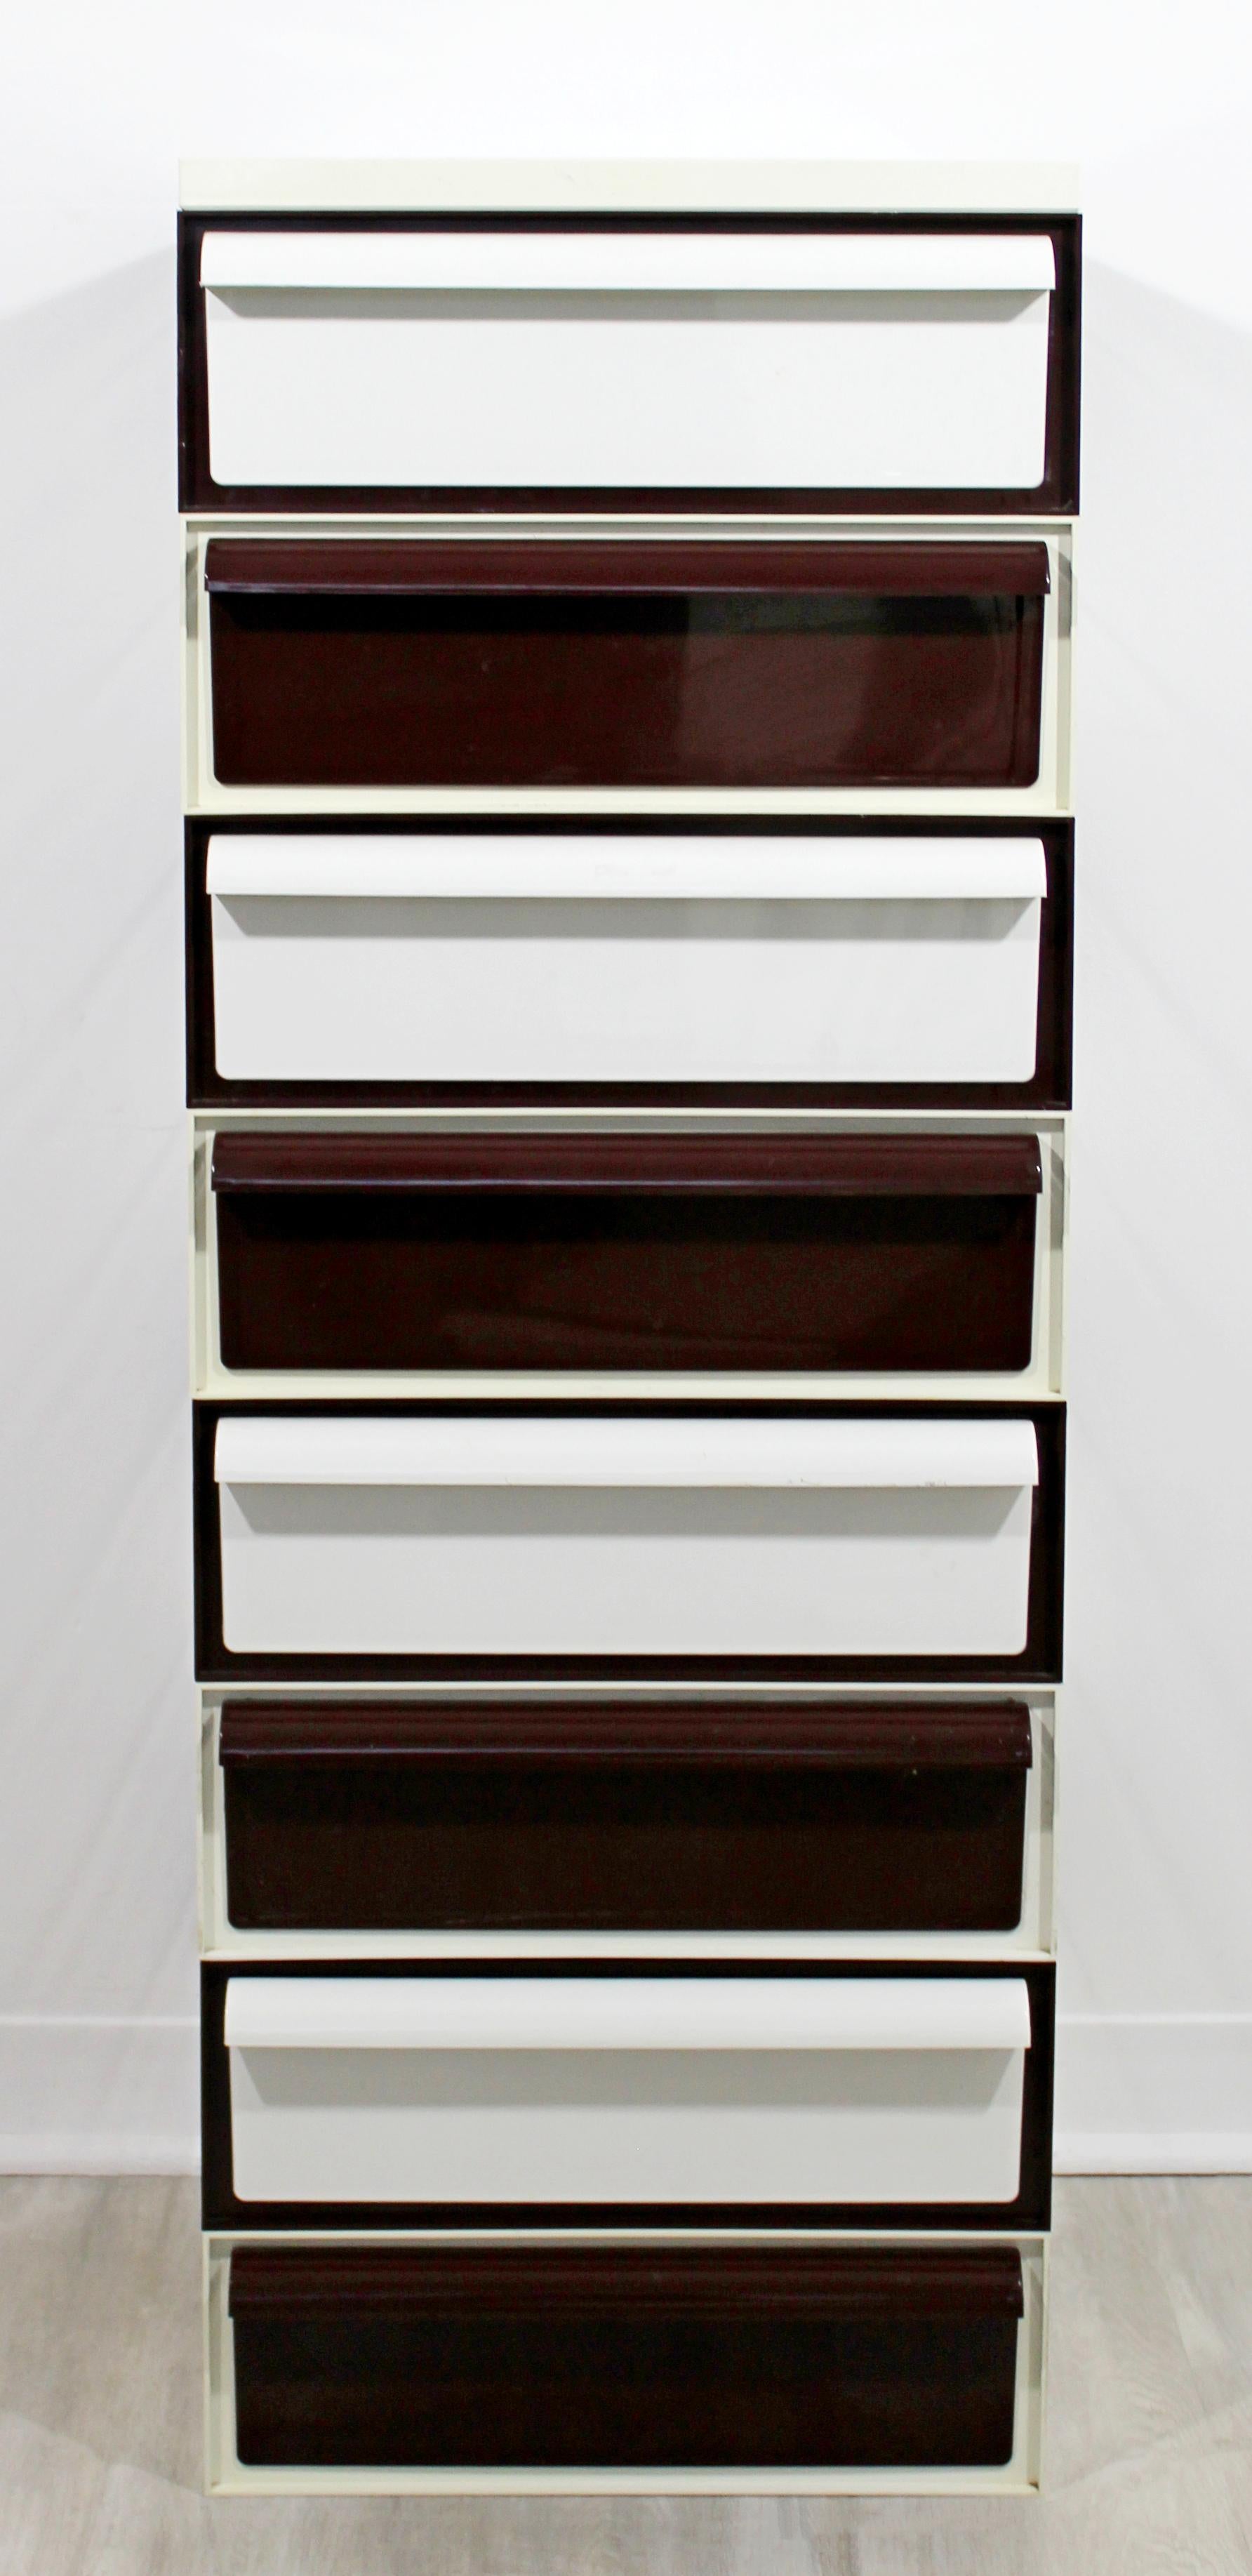 For your consideration is an incredible, eight-drawer, stacking file cabinet, by Simon Russell for Kartell, circa 1970s. Includes two extra drawers that are missing hardware. In very good vintage condition. The dimensions are 16.5